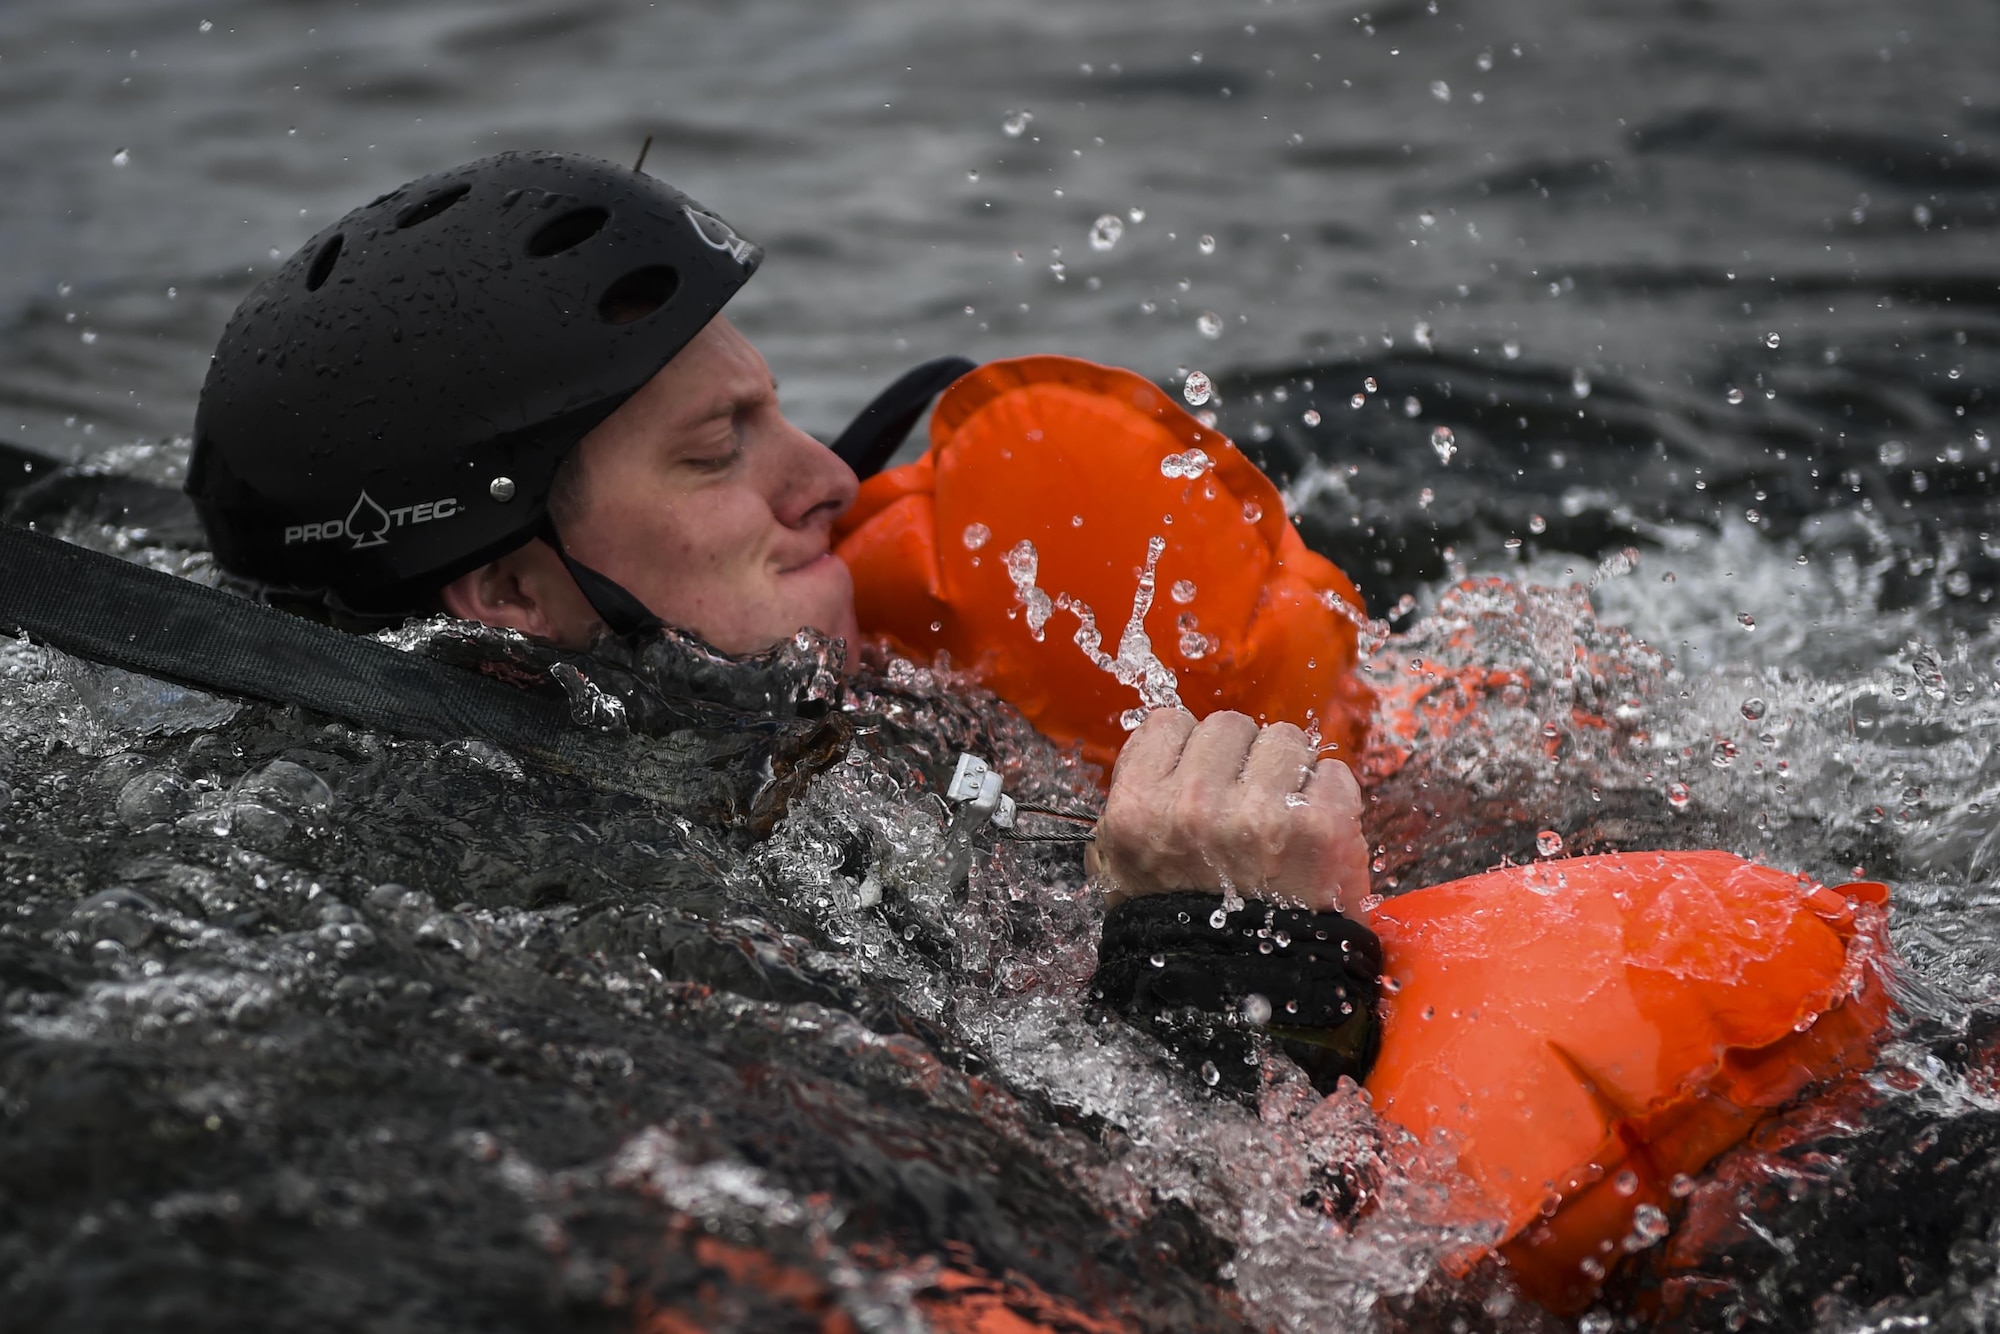 Staff Sgt. Josh Clements, a special missions aviator with the 4th Special Operations Squadron, releases from a simulated parachute during water survival training at Hurlburt Field, Fla., March 14, 2017. Aircrew must participate in combat, emergency parachute and water survival training tri-annually. (U.S. Air Force photo by Airman 1st Class Joseph Pick)